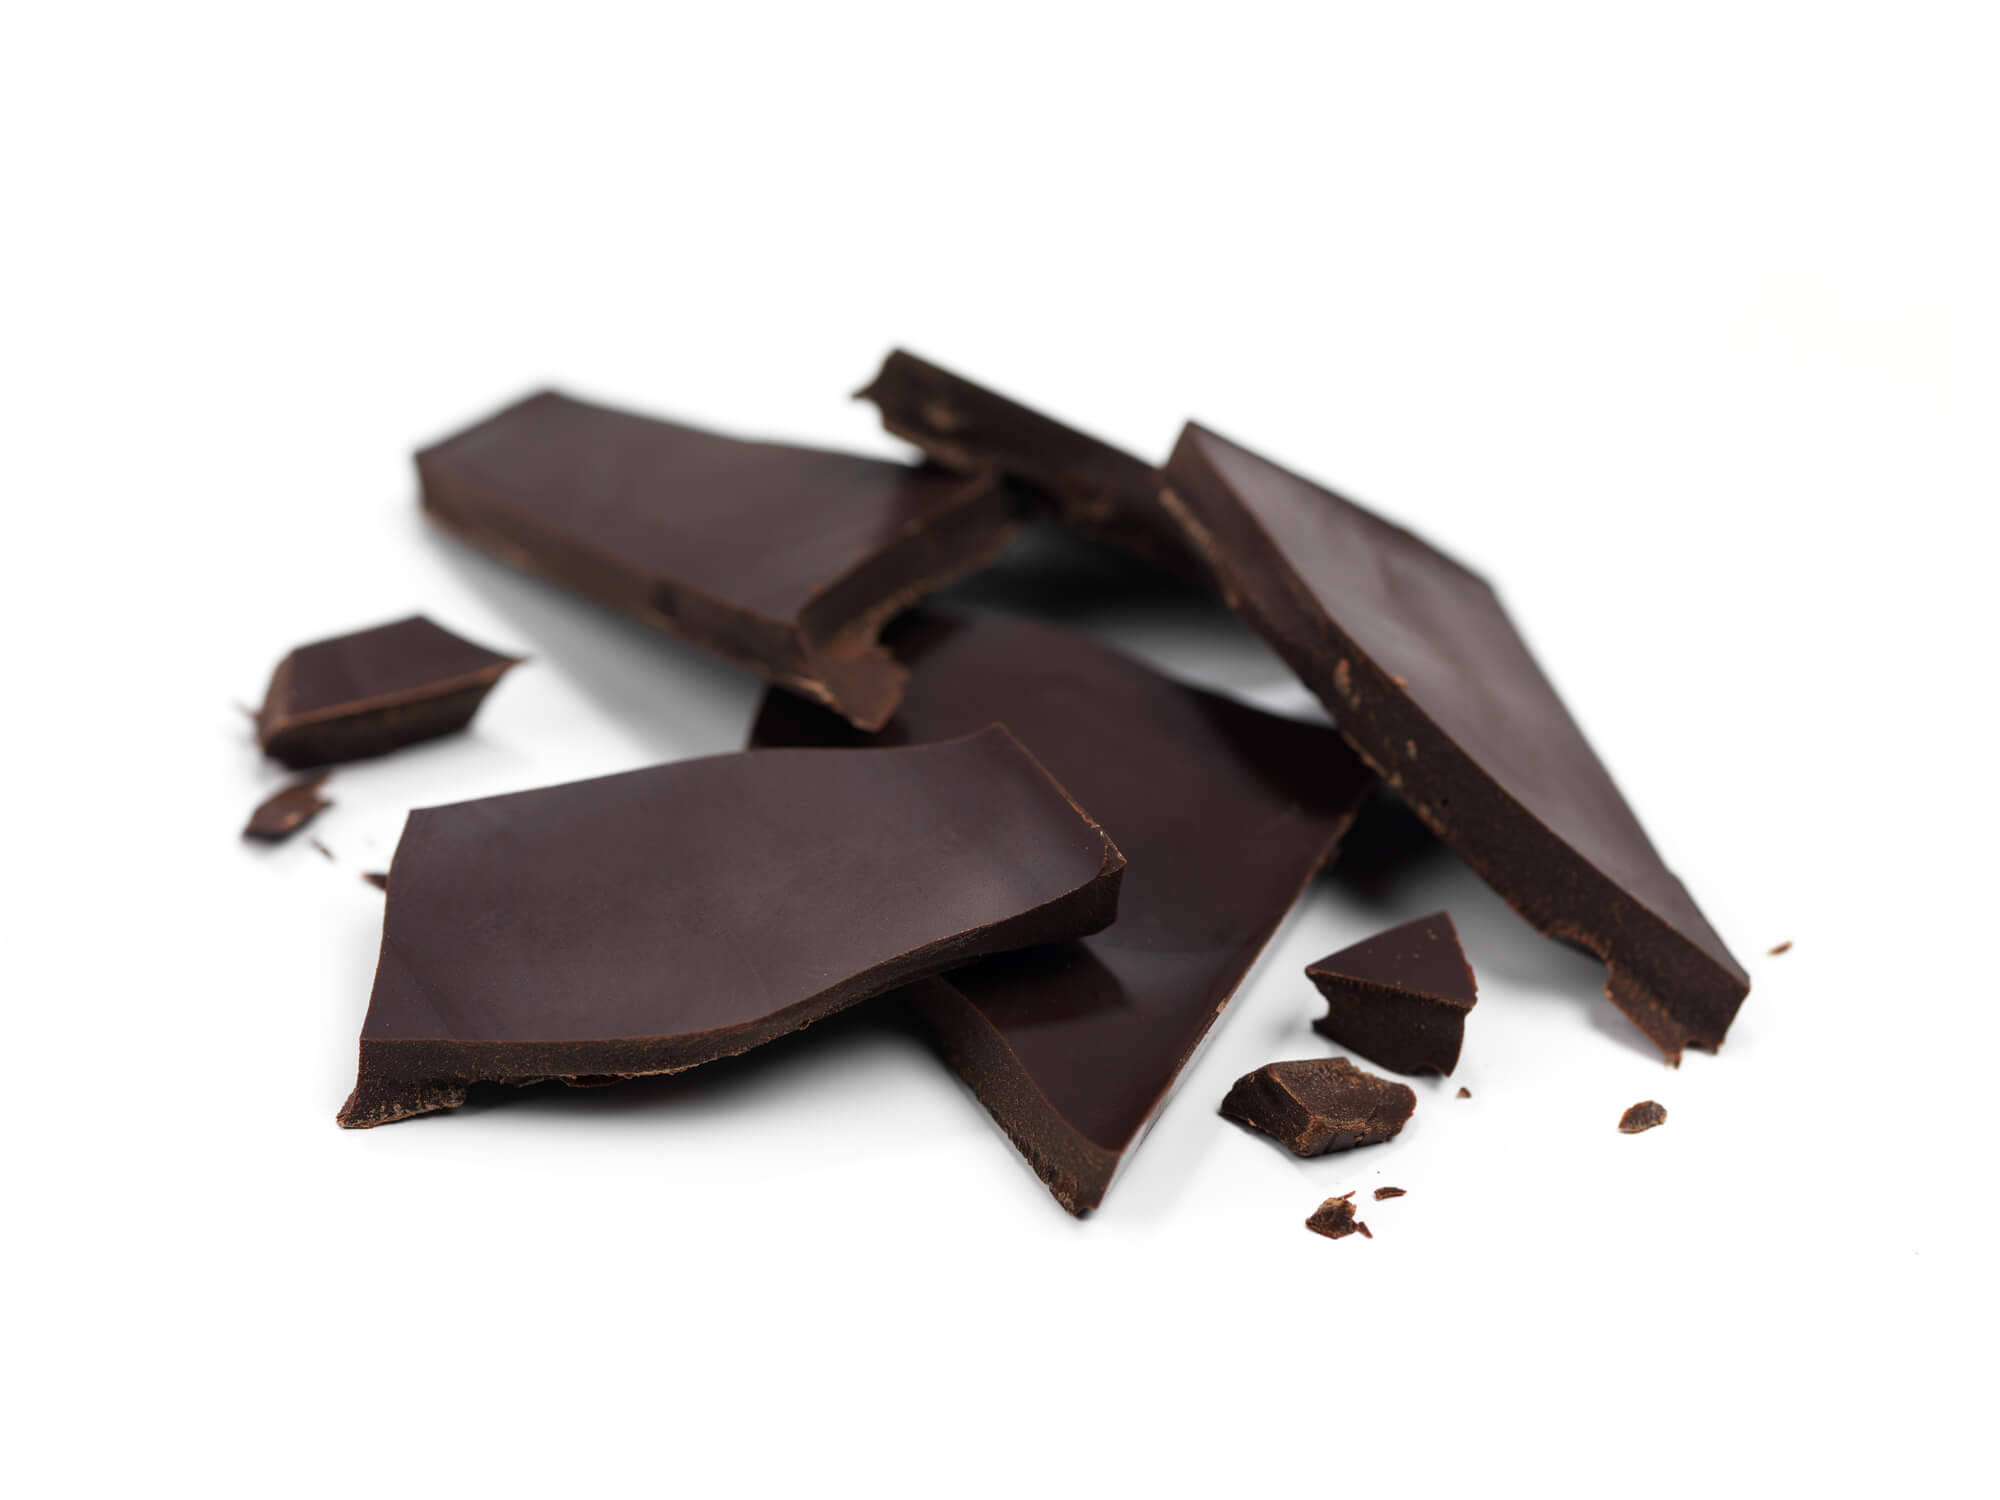 A photo of several pieces of dark chocolate laid on a white surface against a white background